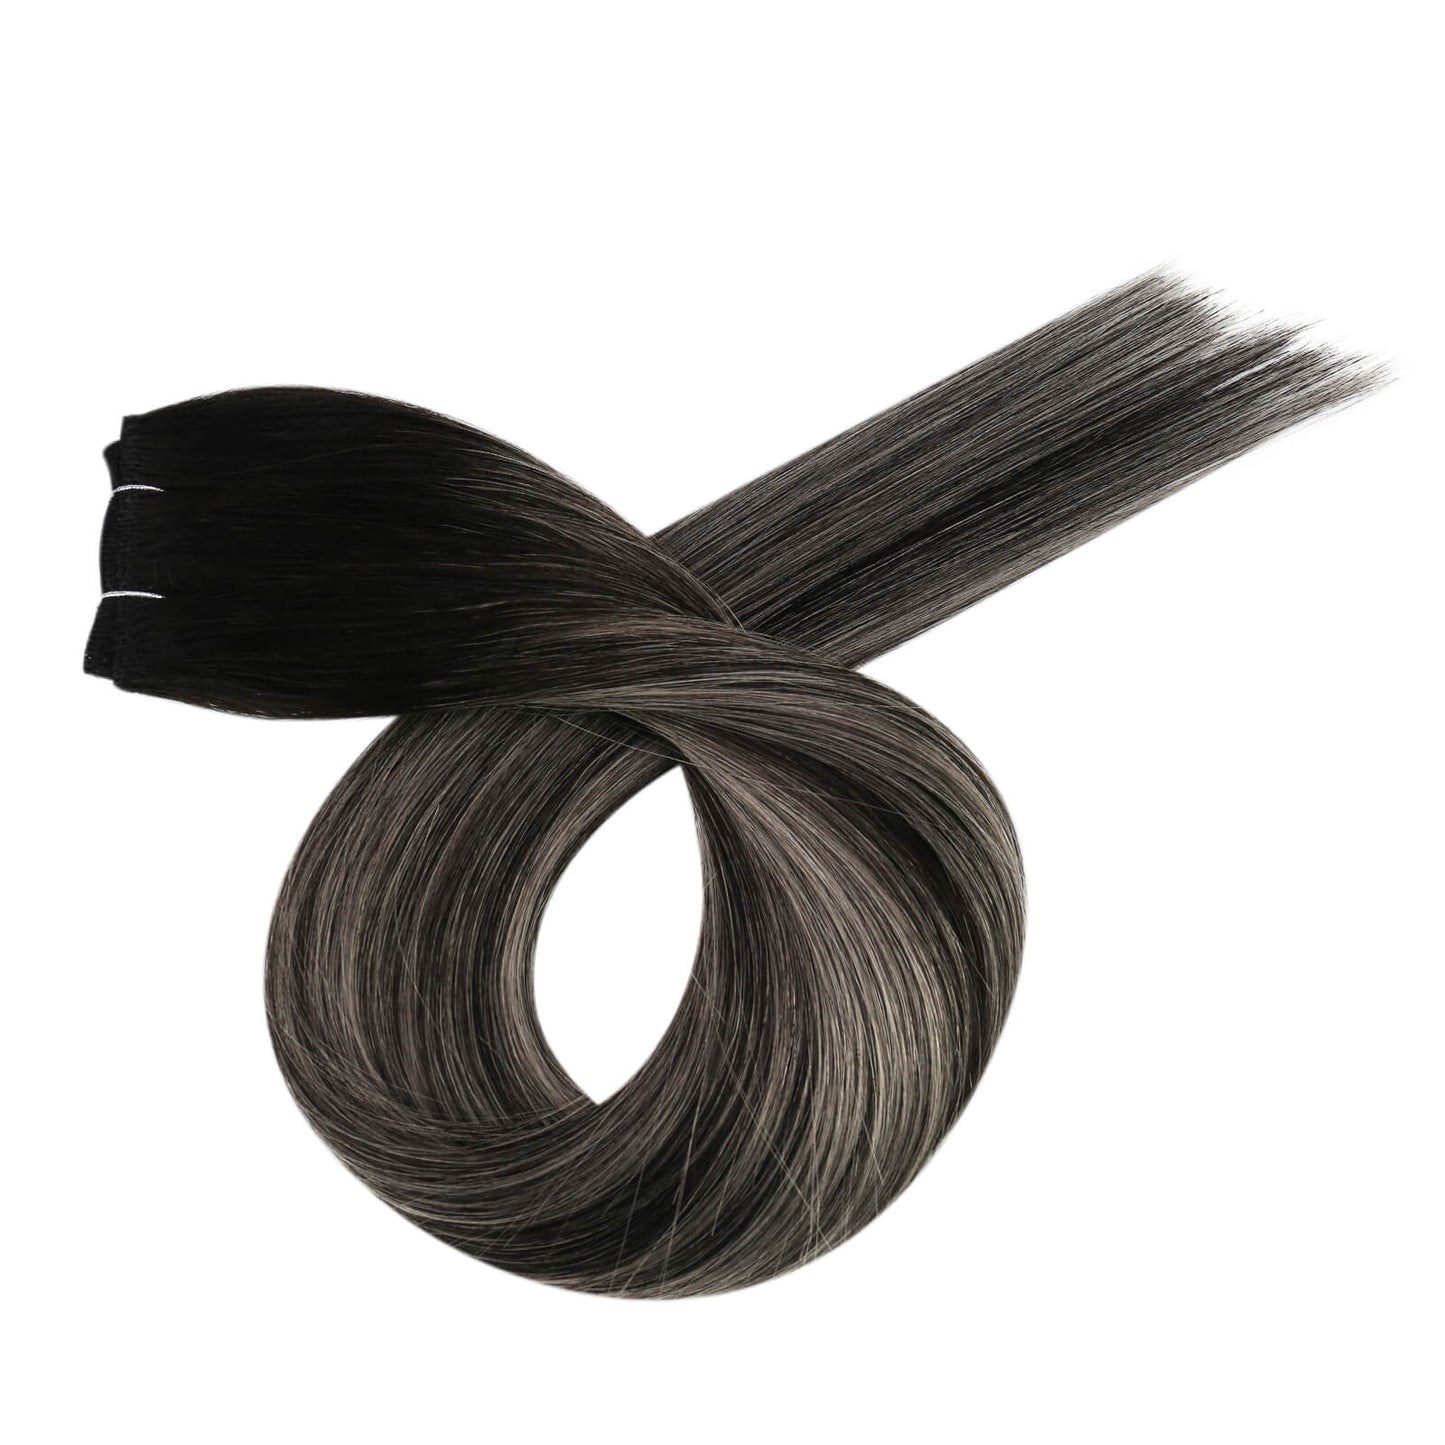 Sew in hair weft black with silver hair high quality hair extensions wholesale